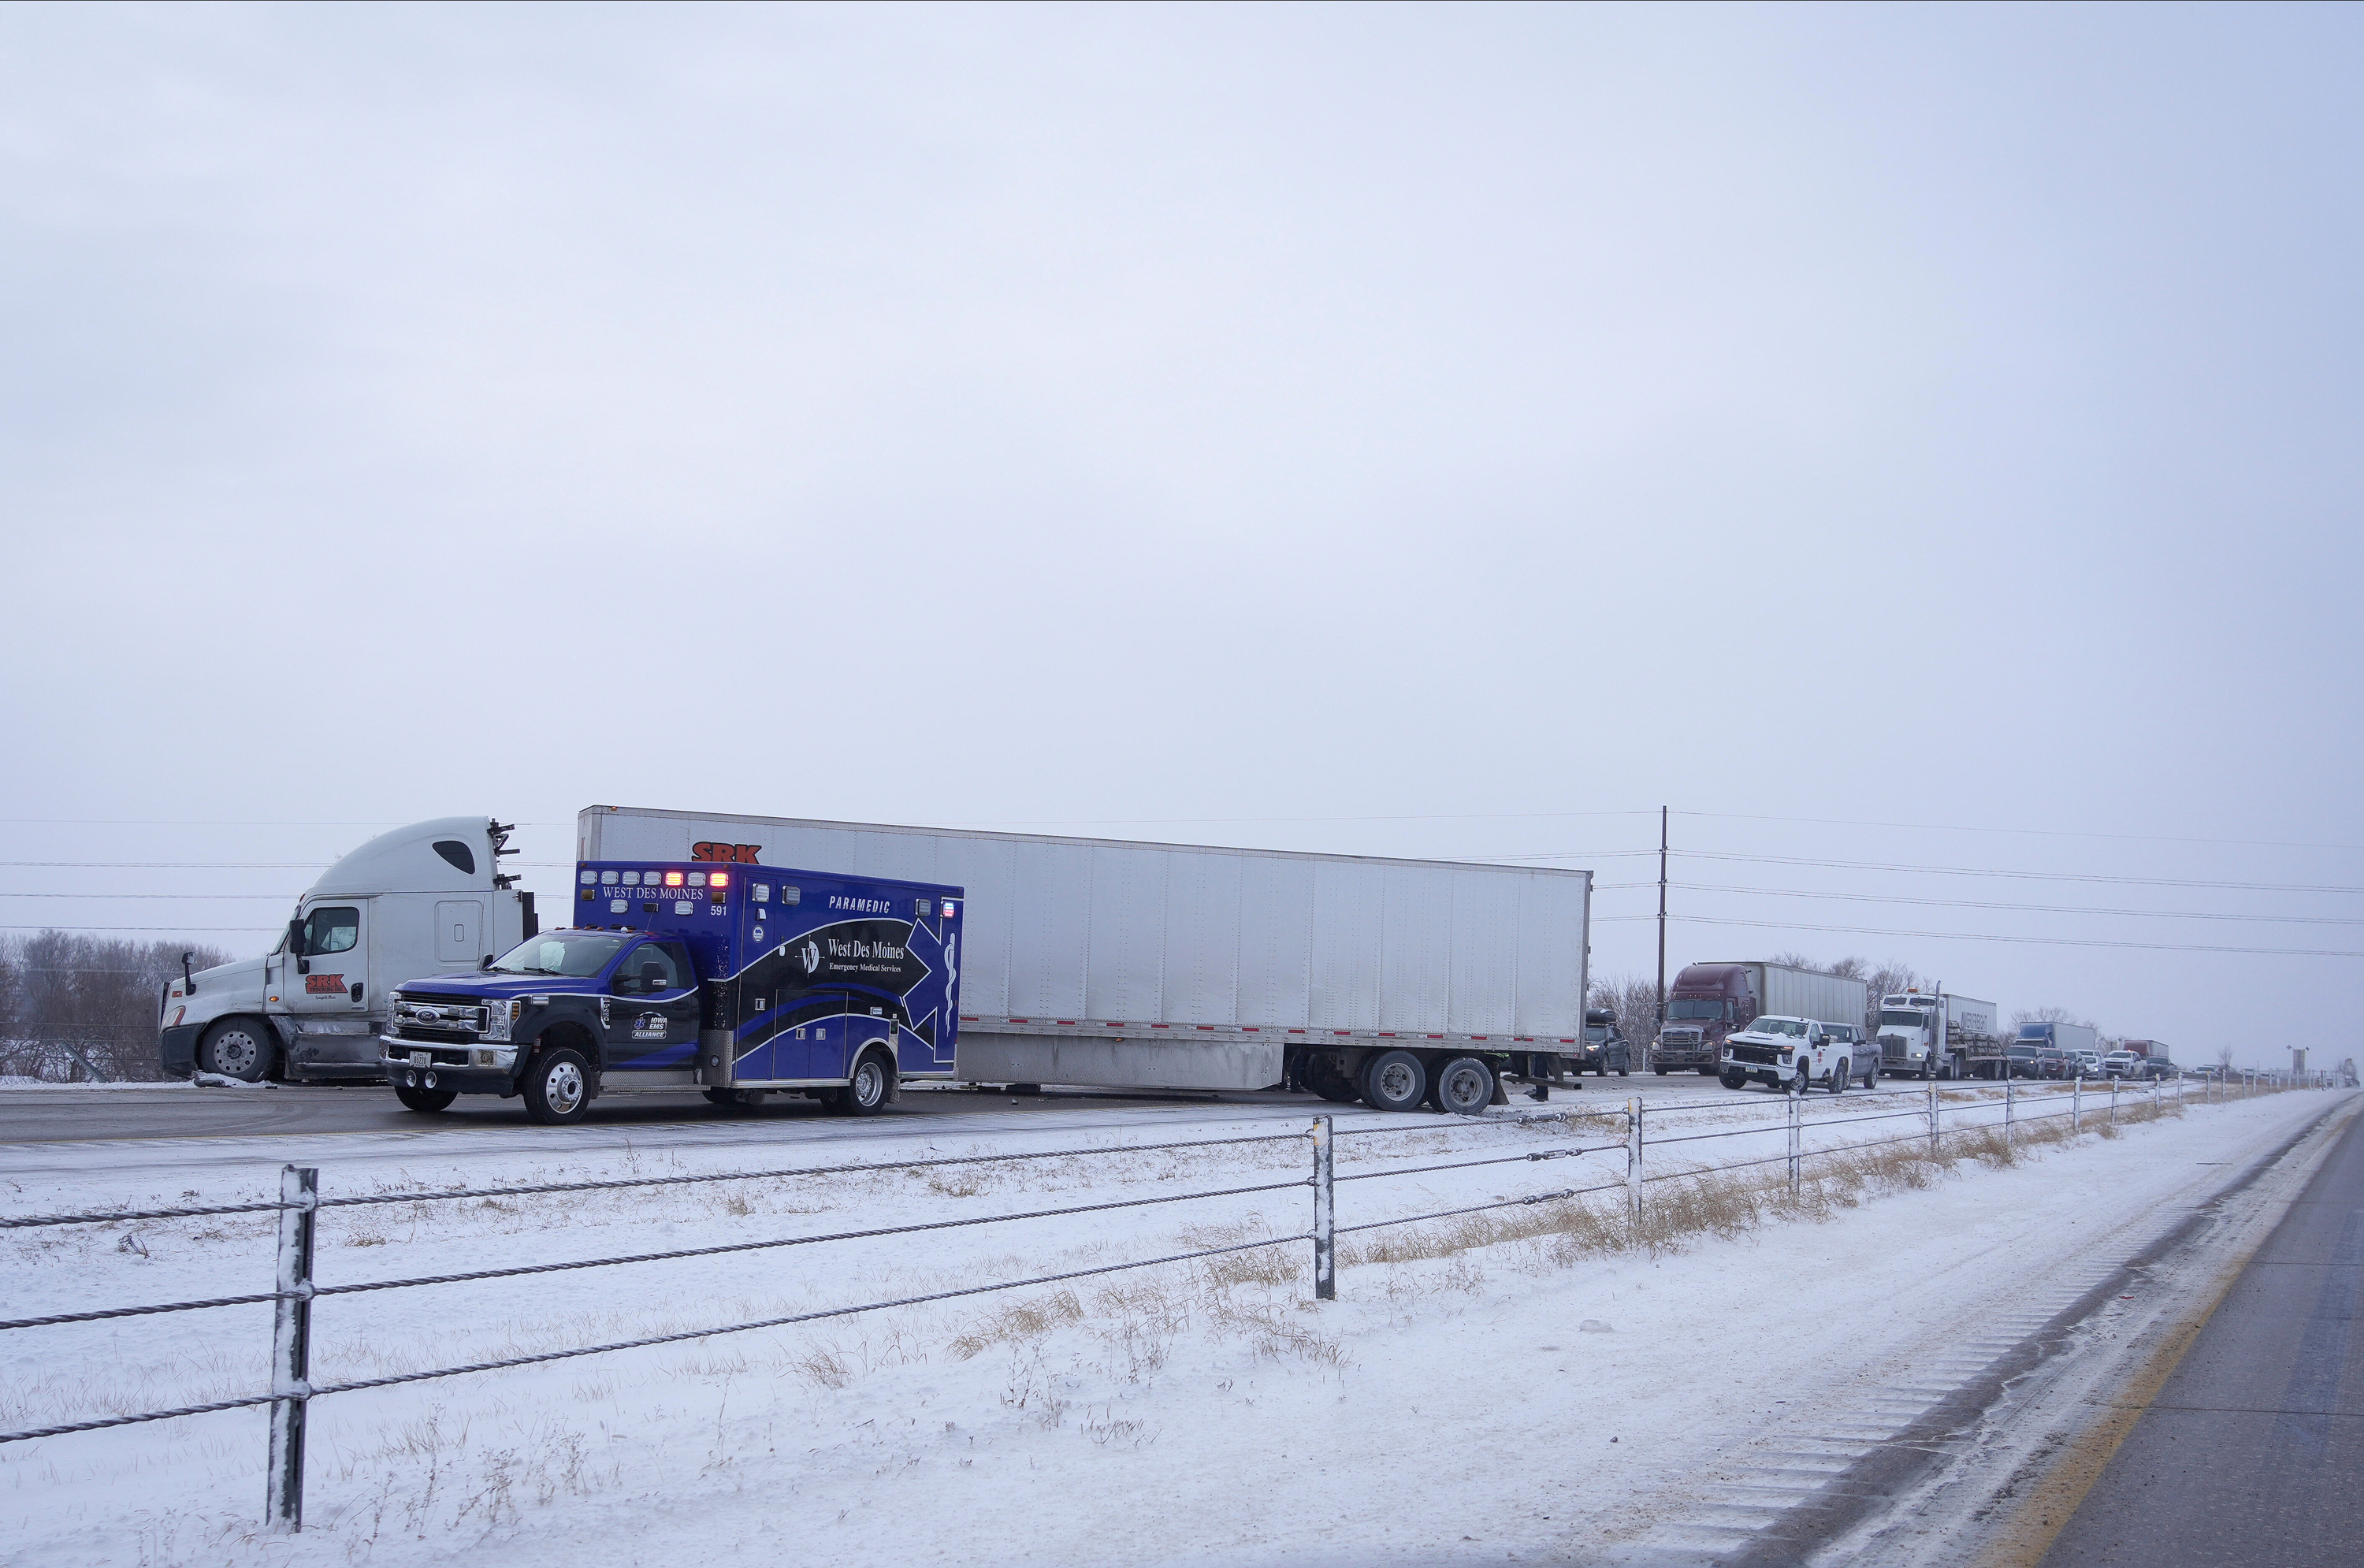 An accident involving a semi tractor trailer blocked the eastbound lanes of Interstate 80 in West Des Moines, Iowa on Thursday.